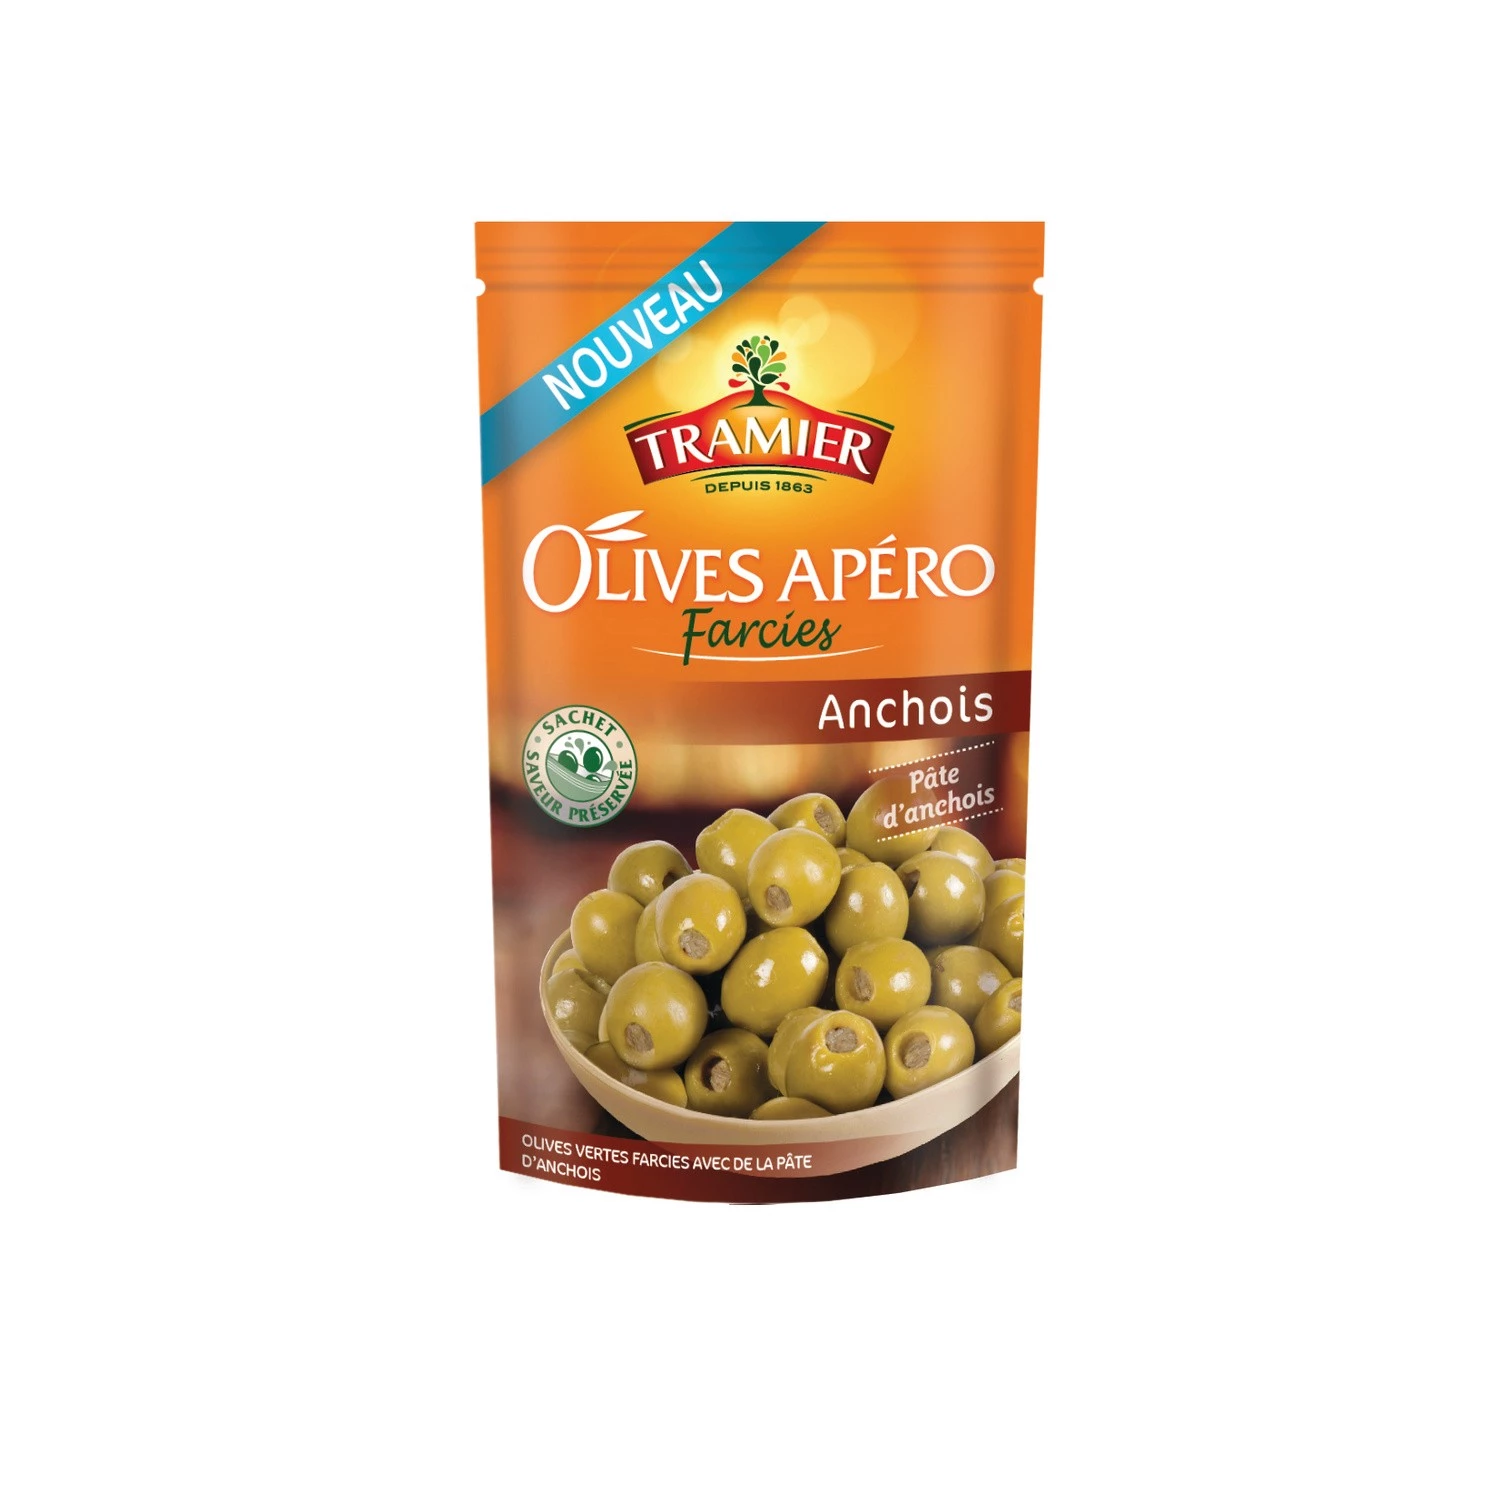 Olive Apero Anchois 150g